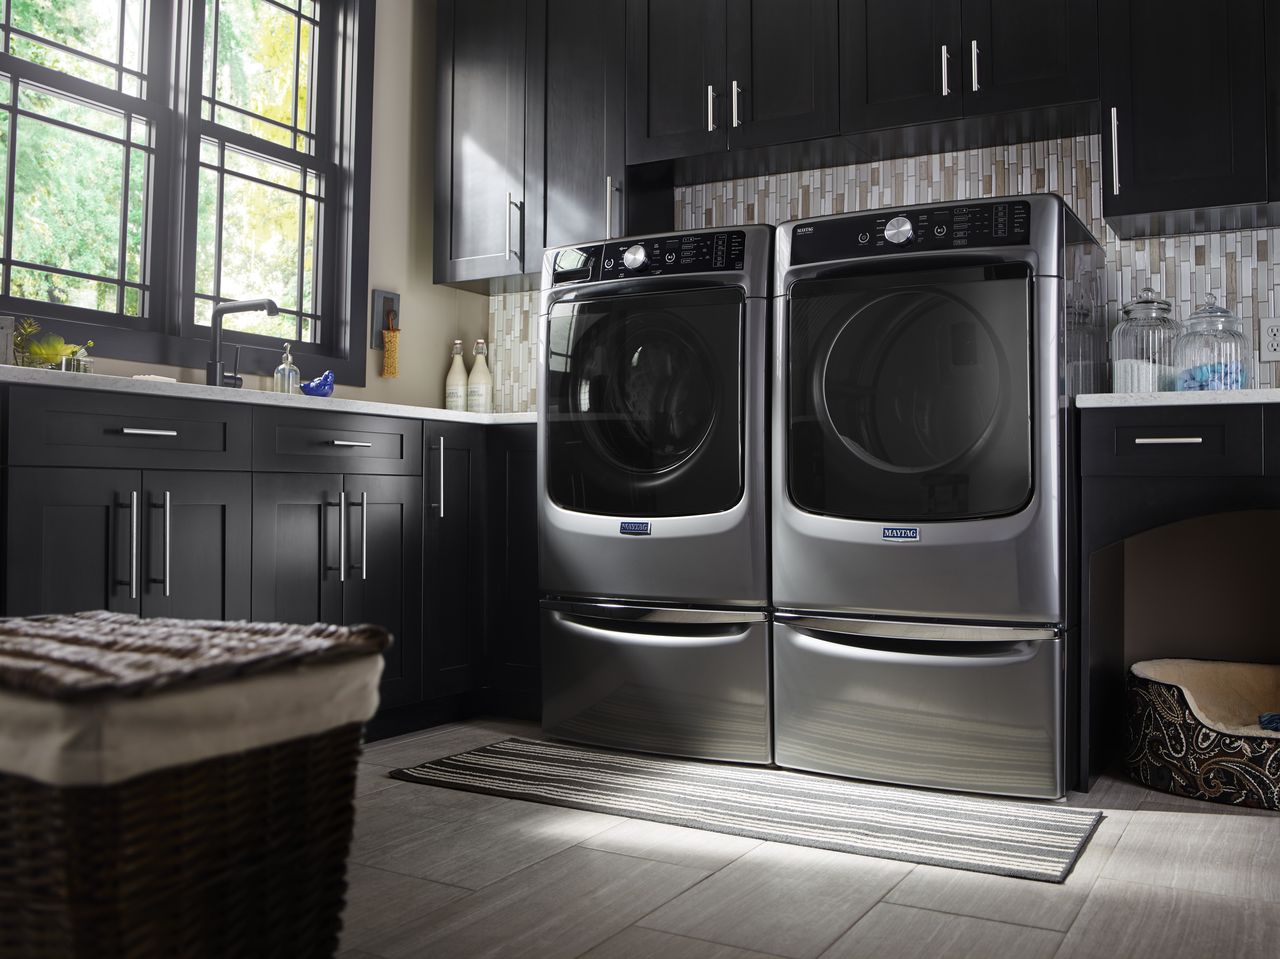 A set of Maytag laundry machines in a laundry room with dark cabinets